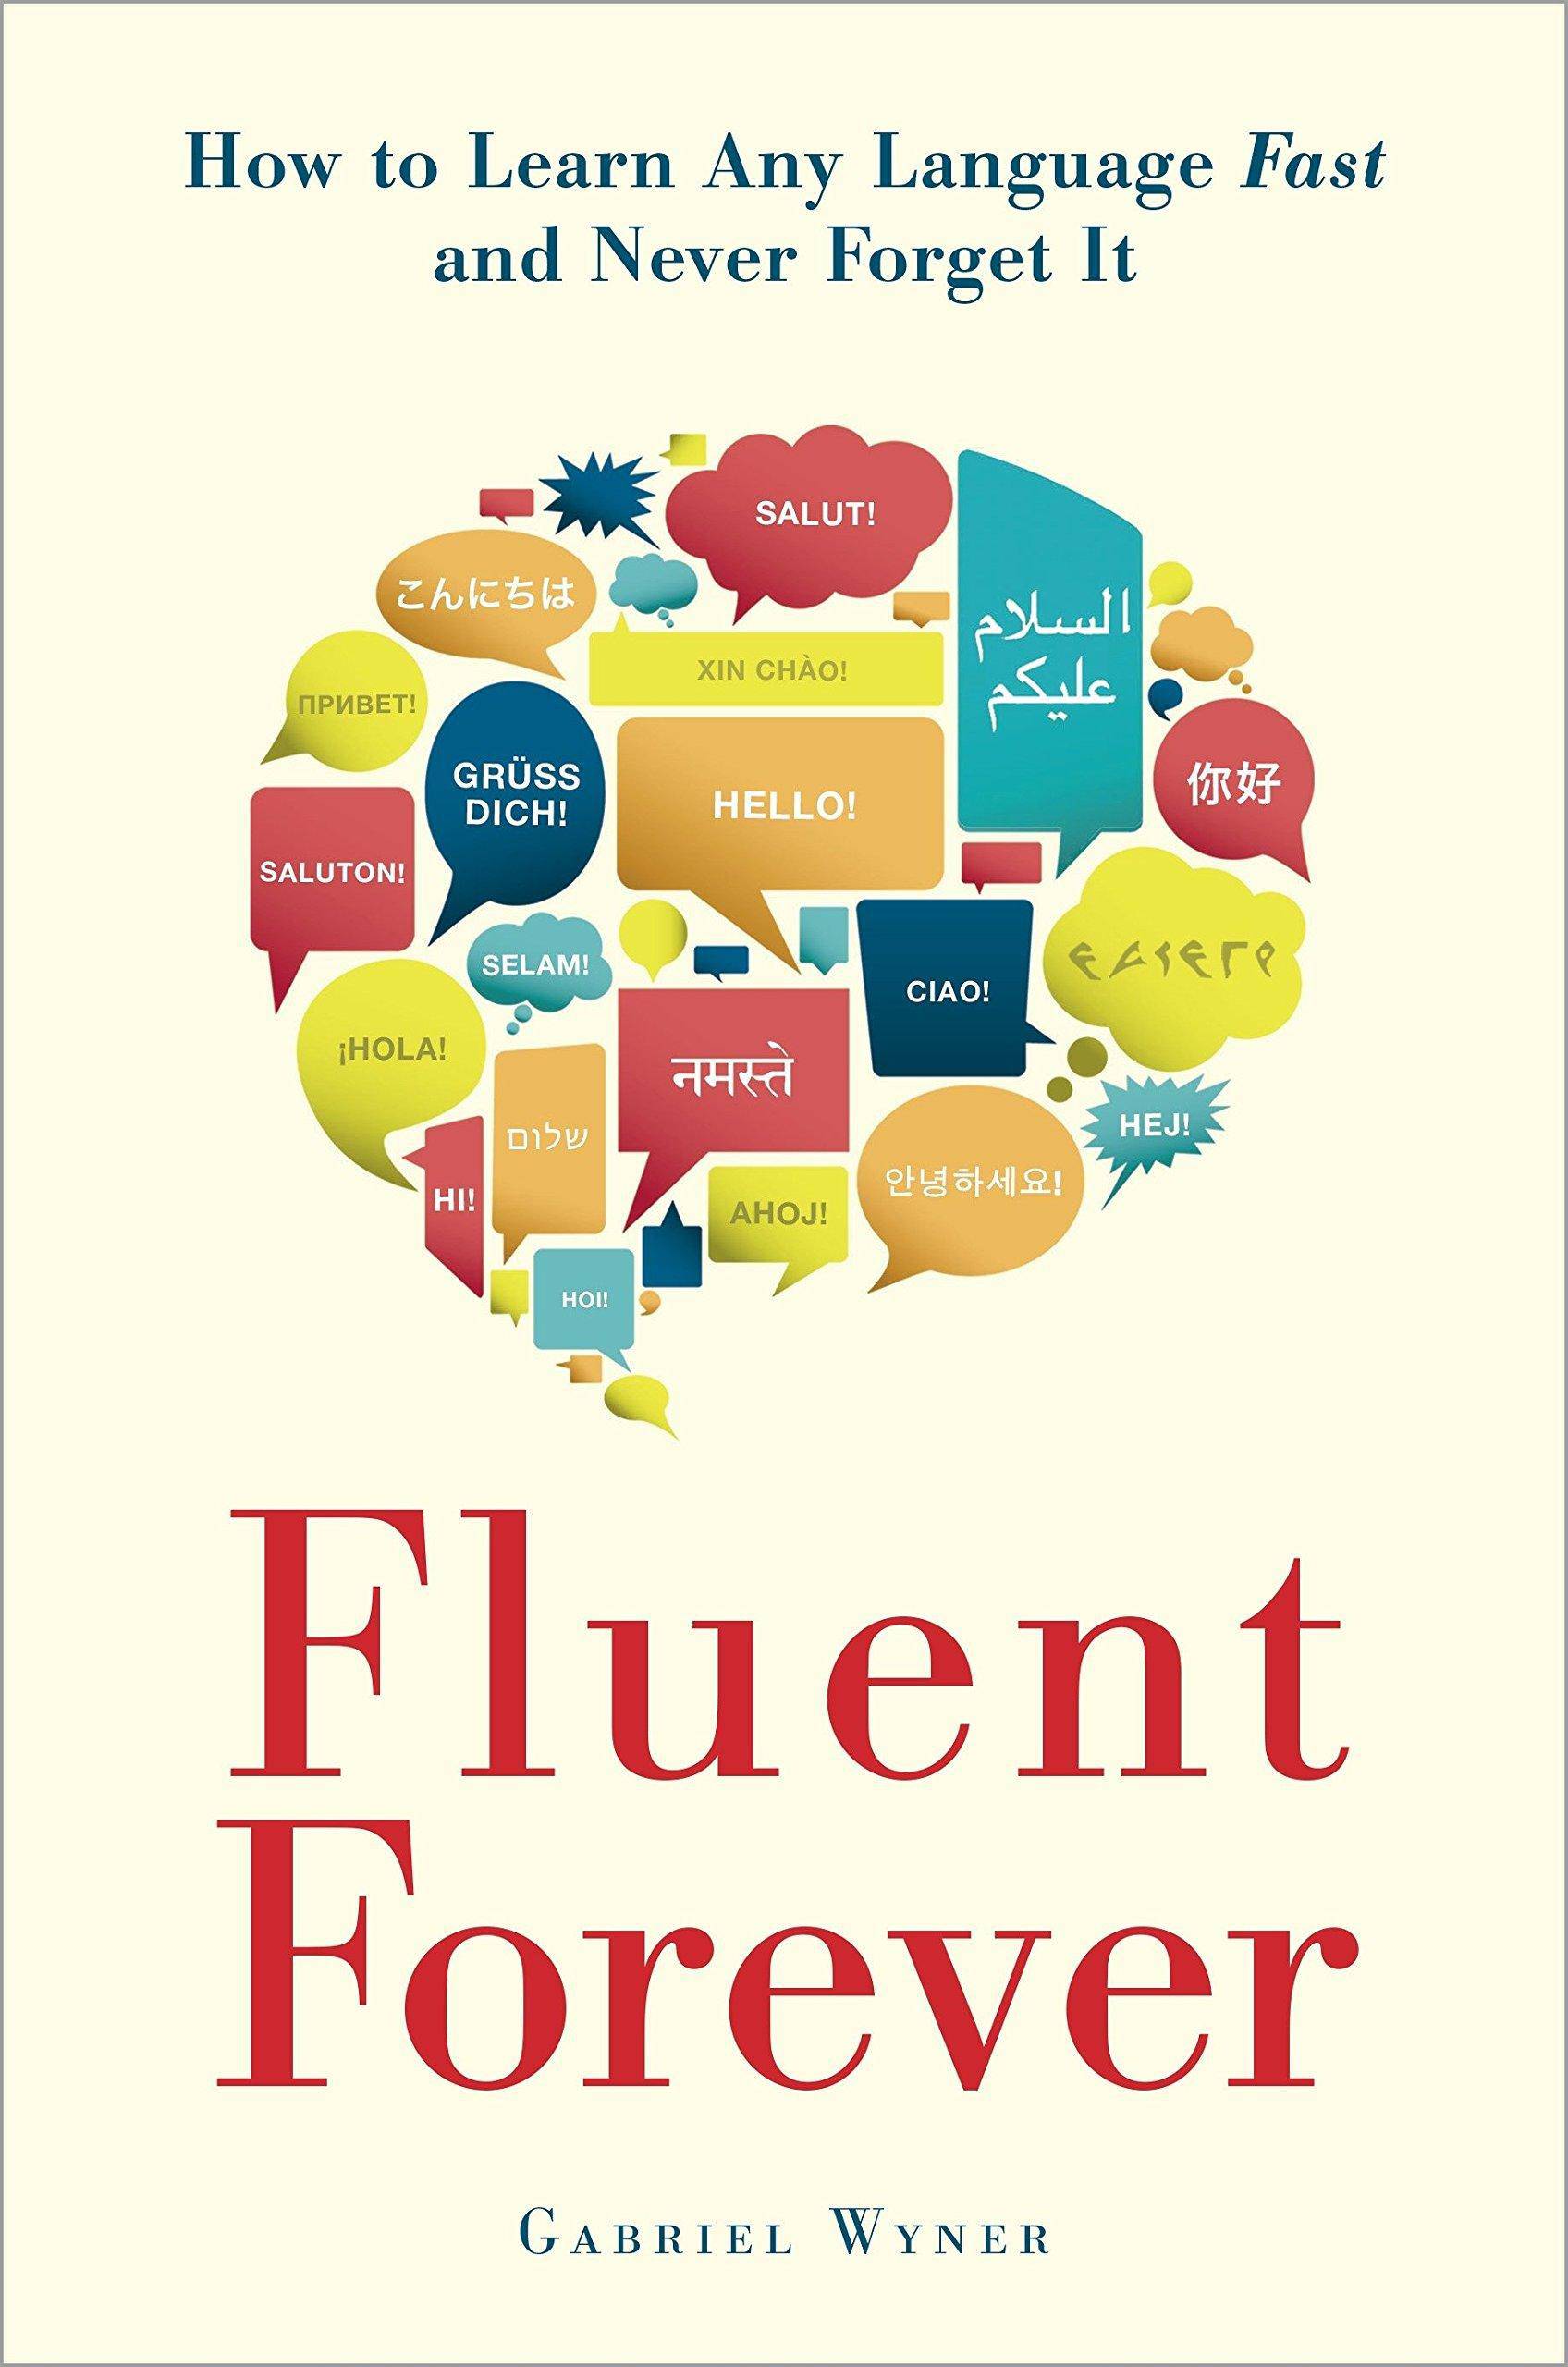 Fluent Forever: How to Learn Any Language Fast and Never Forget It - SureShot Books Publishing LLC